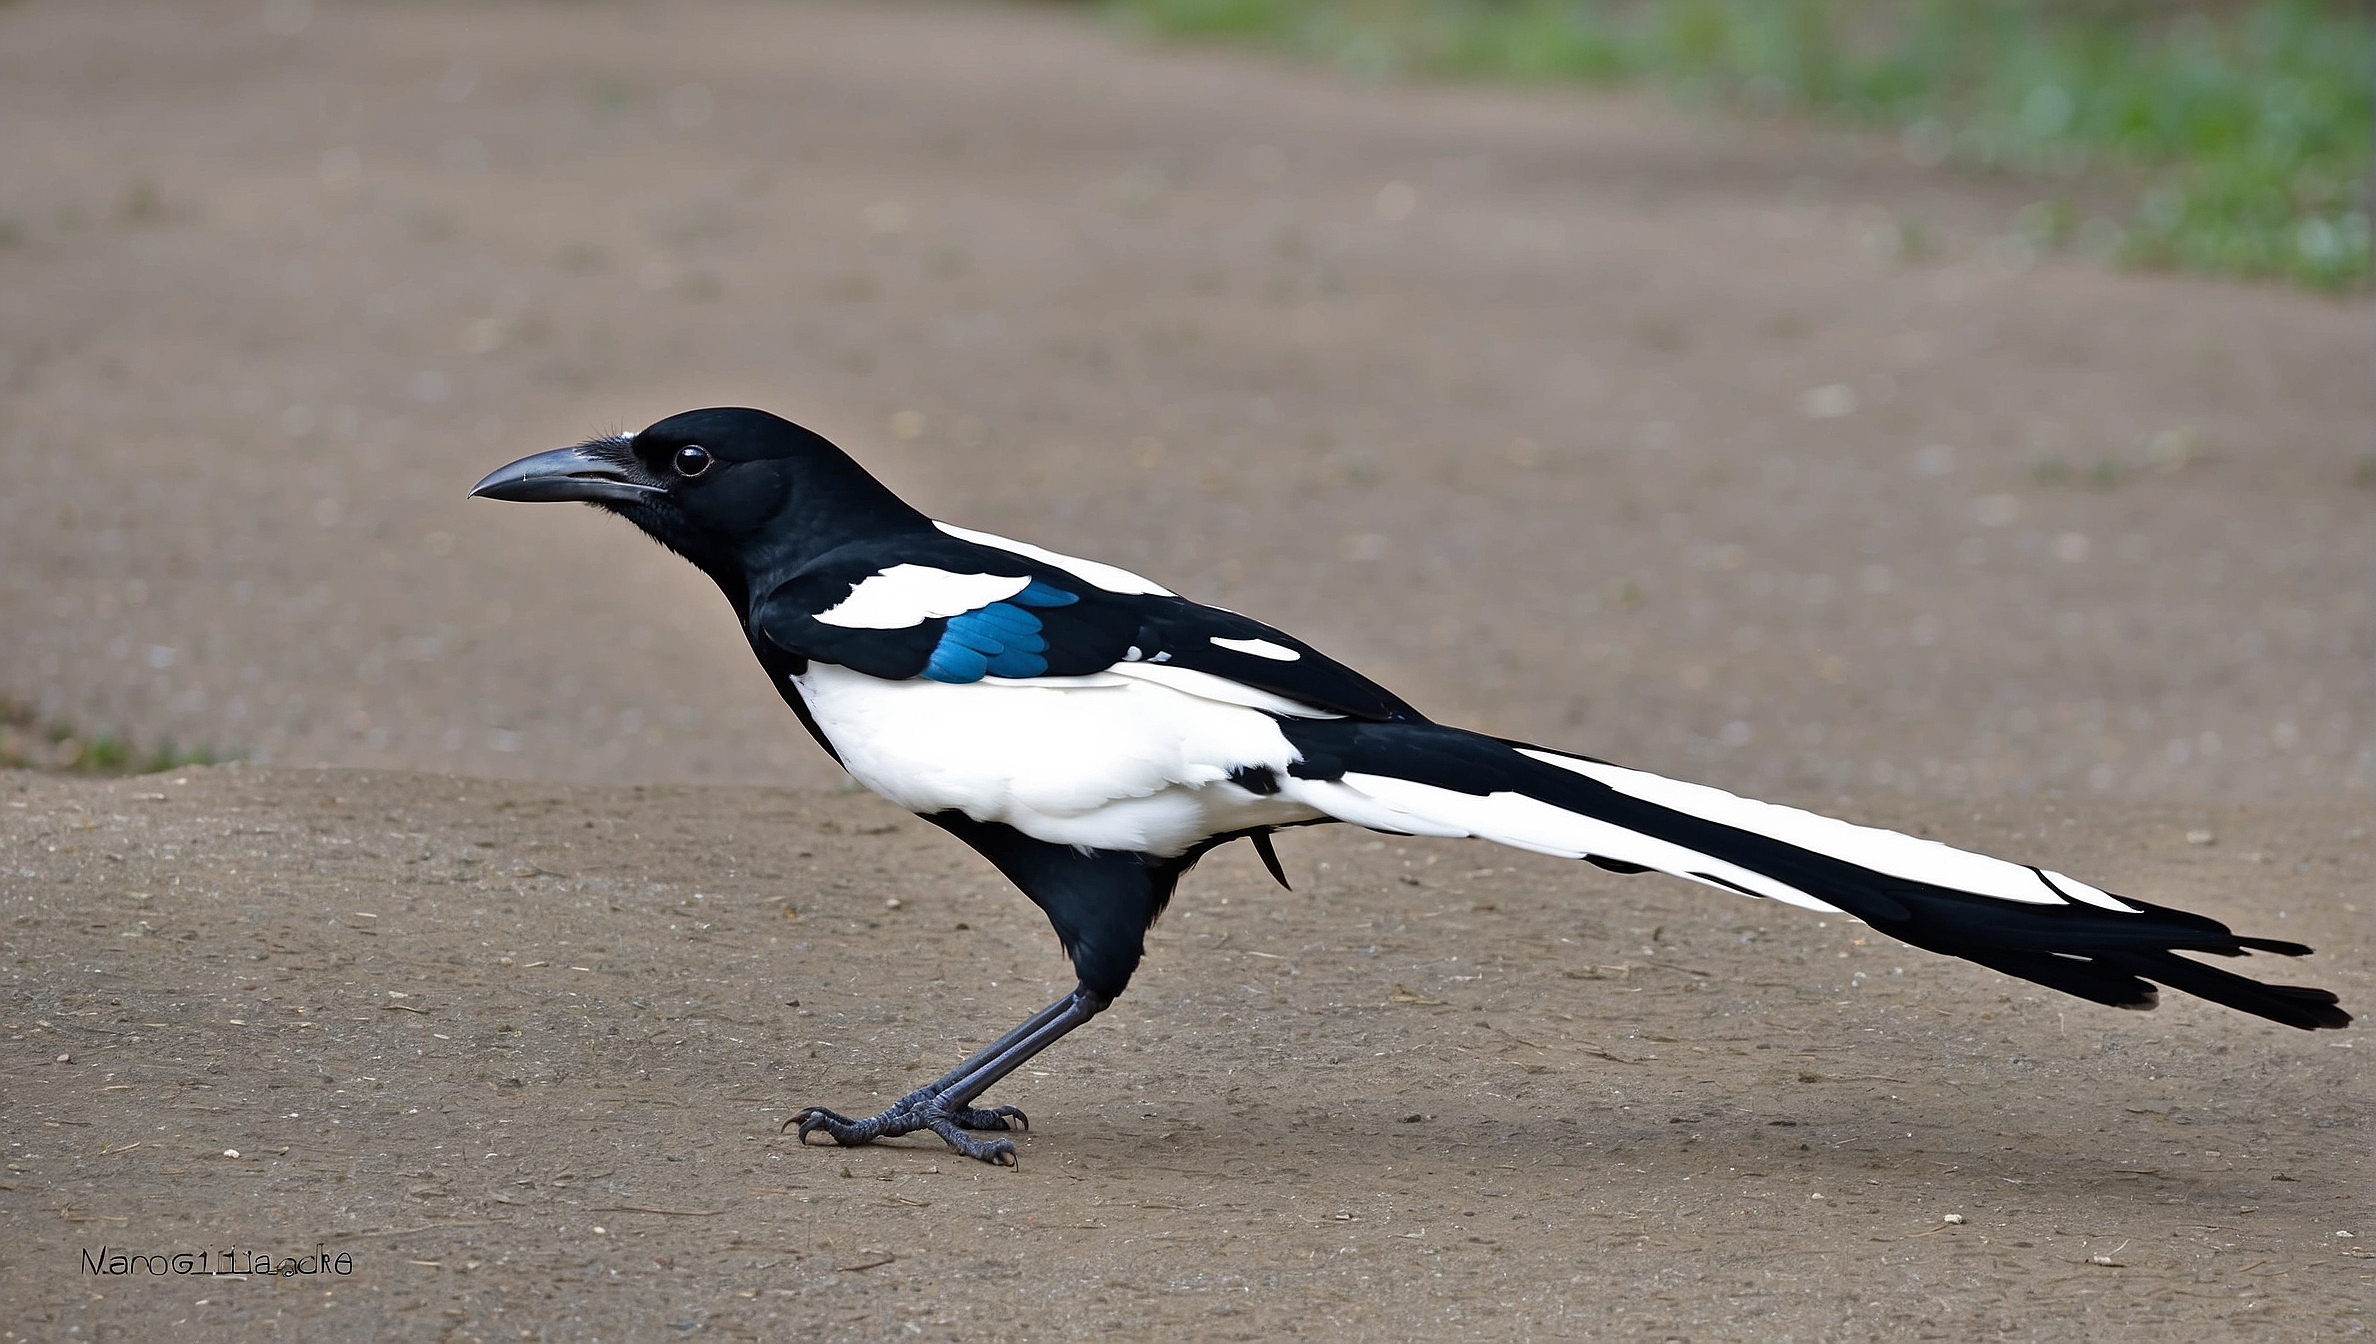 When Do Magpies Lay Eggs?